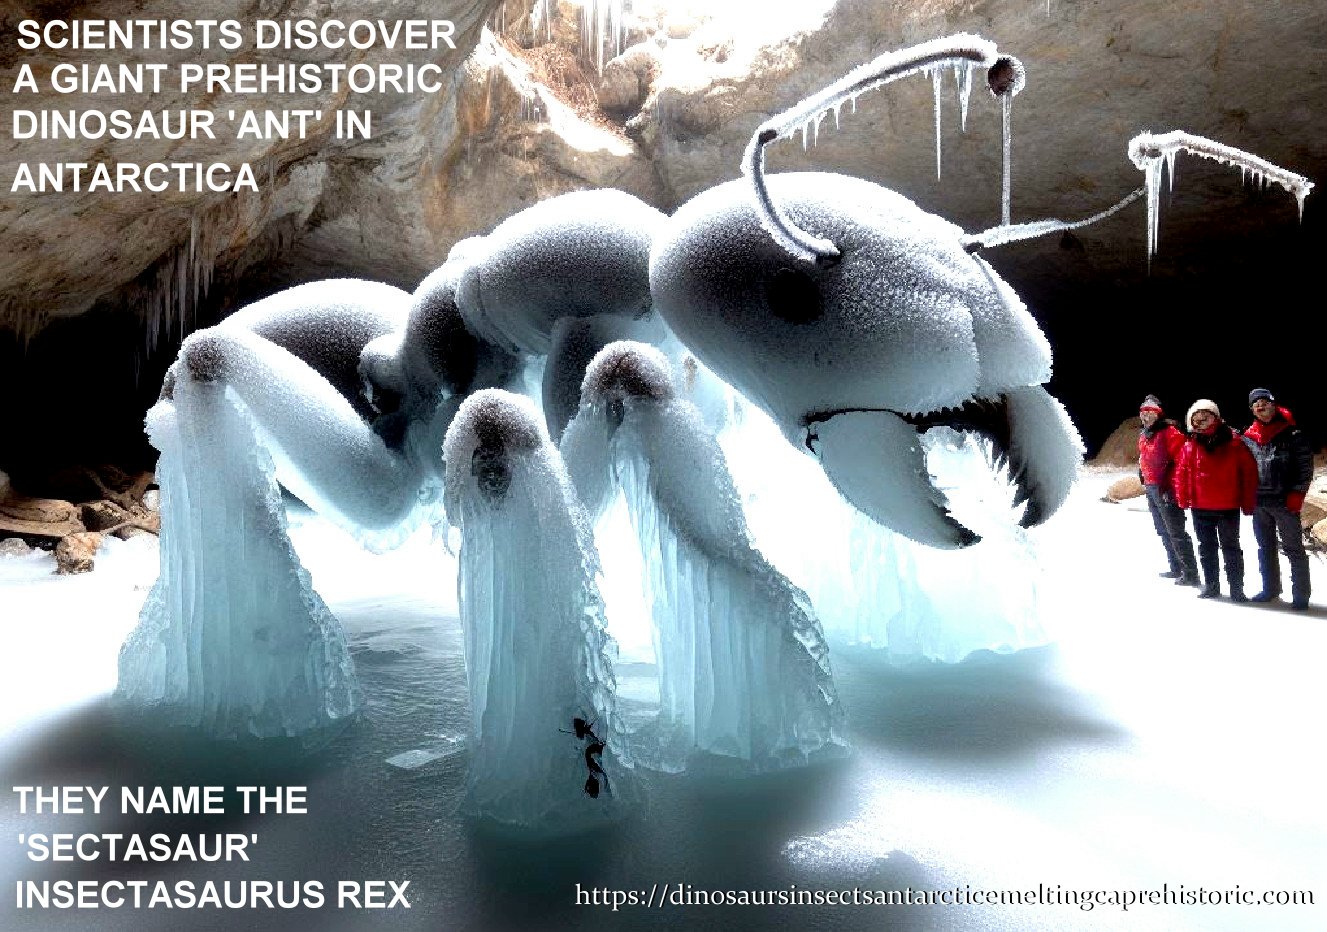 NEWS FLASH - Scientists discover what they believe is a giant prehistoric dinosaur ant, a 'Sectasaur,' in a cave in Antarctica. They name their incredible find: "Insectasaurus Rex." The rumours of such things, started by Fabian von Bellinghausen's infamous find, appears to be true.